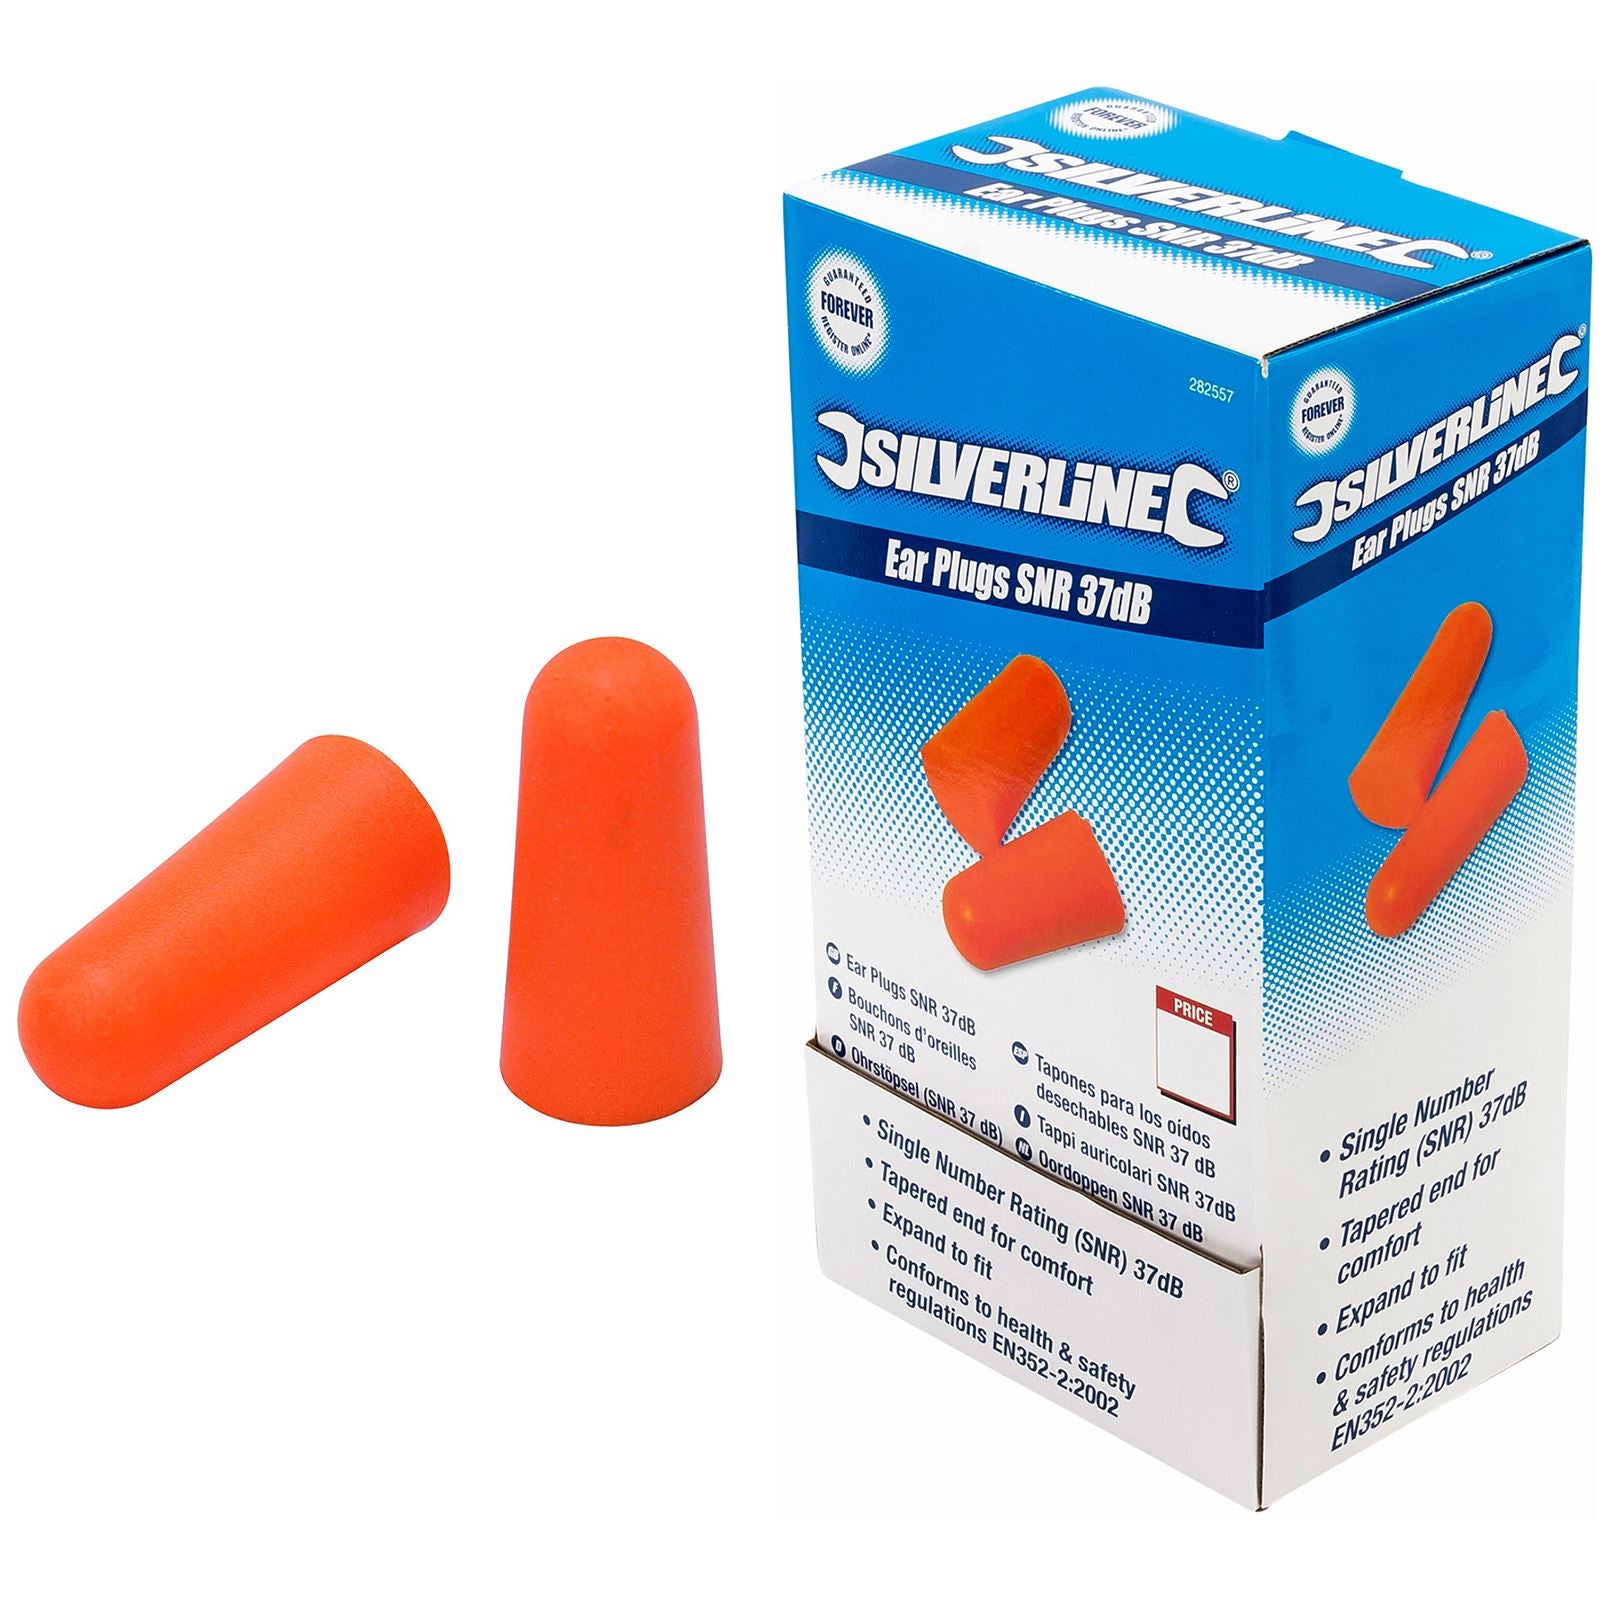 Silverline 200pk Of 2 Piece Ear Plugs SNR 37 dB Disposable Hygienic Hearing Protection